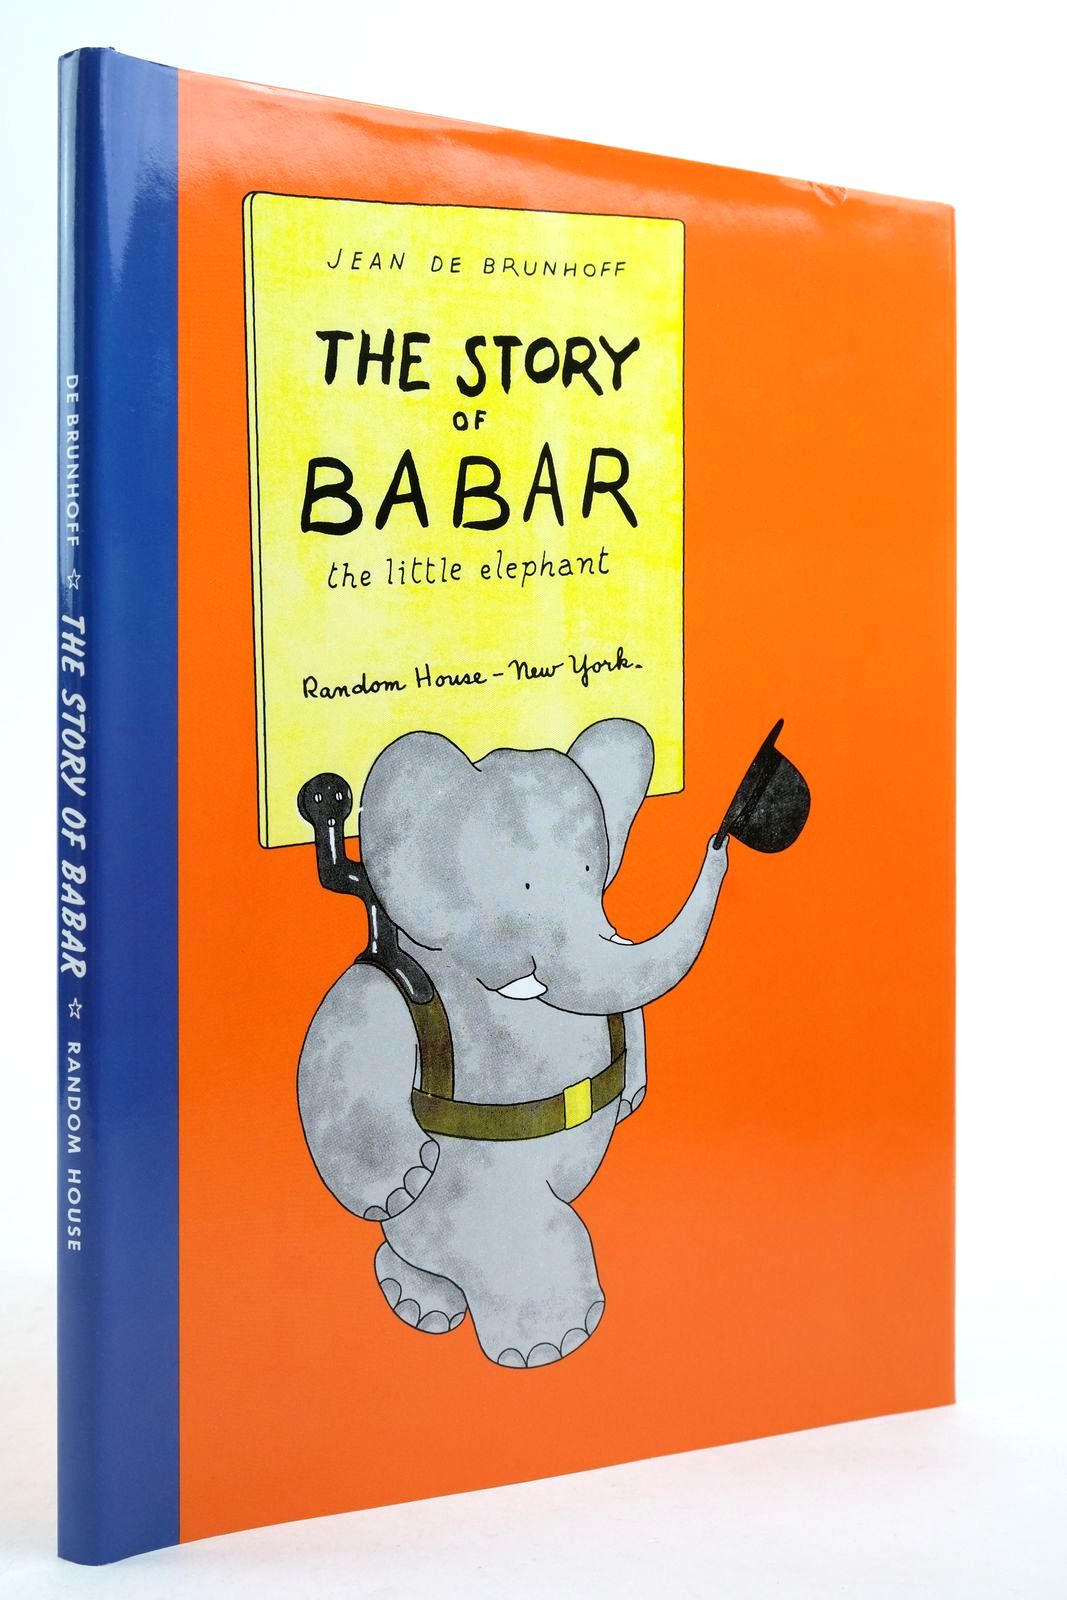 Photo of THE STORY OF BABAR THE LITTLE ELEPHANT written by De Brunhoff, Jean Haas, Merle S. illustrated by De Brunhoff, Jean published by Random House Children'S Books (STOCK CODE: 2140116)  for sale by Stella & Rose's Books